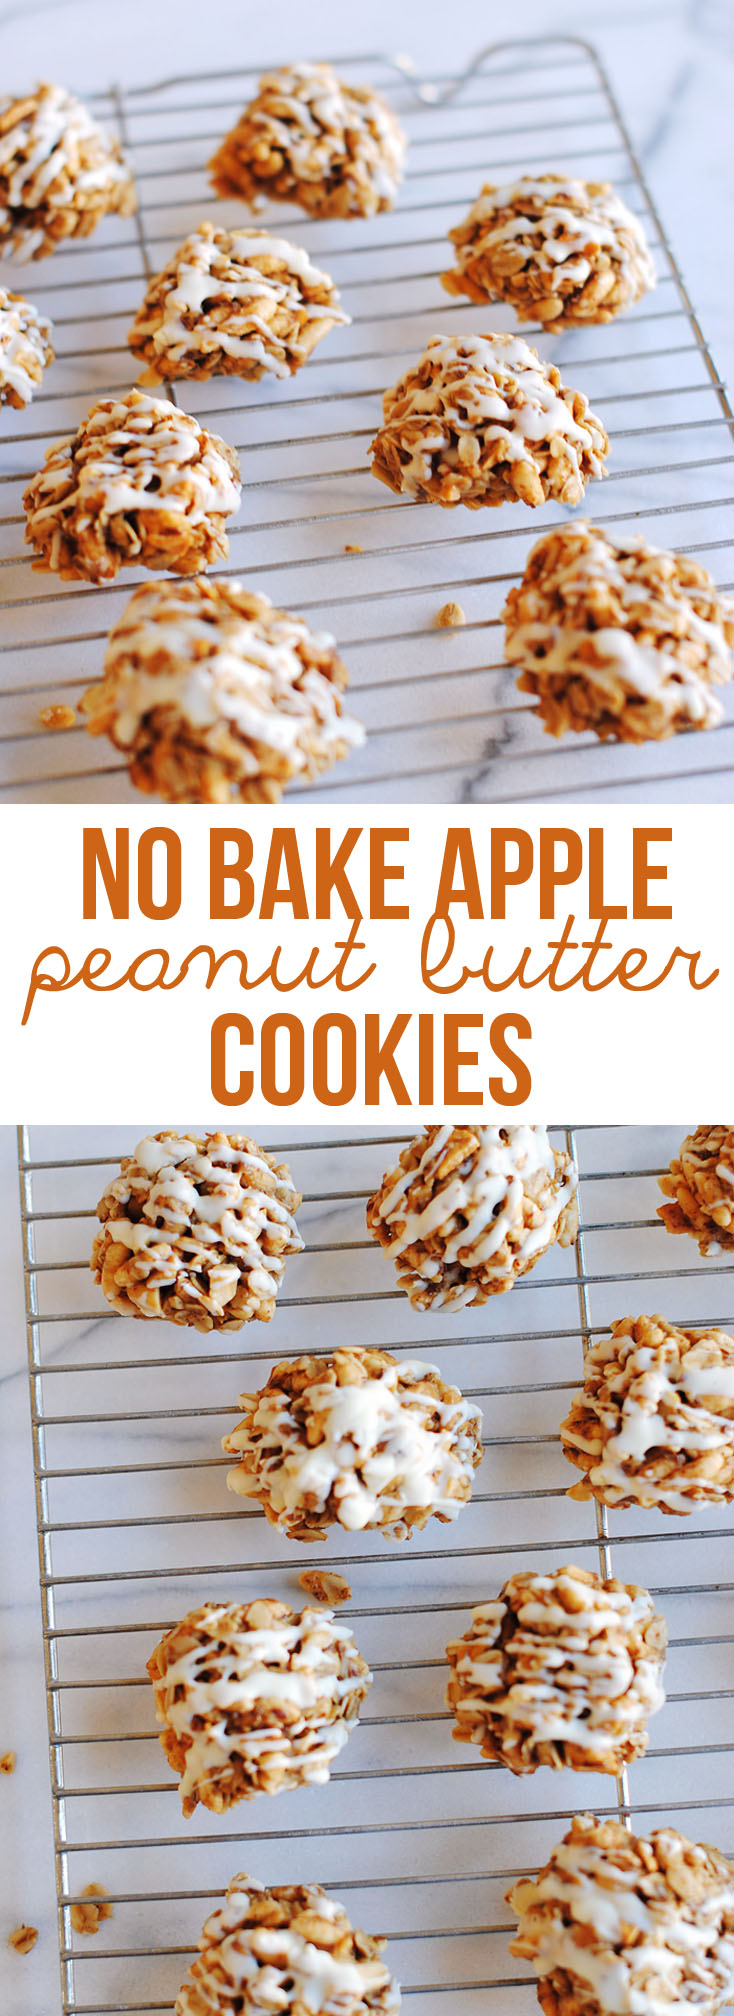 No Bake Apple Peanut Butter Cookies | Eat Yourself Skinny